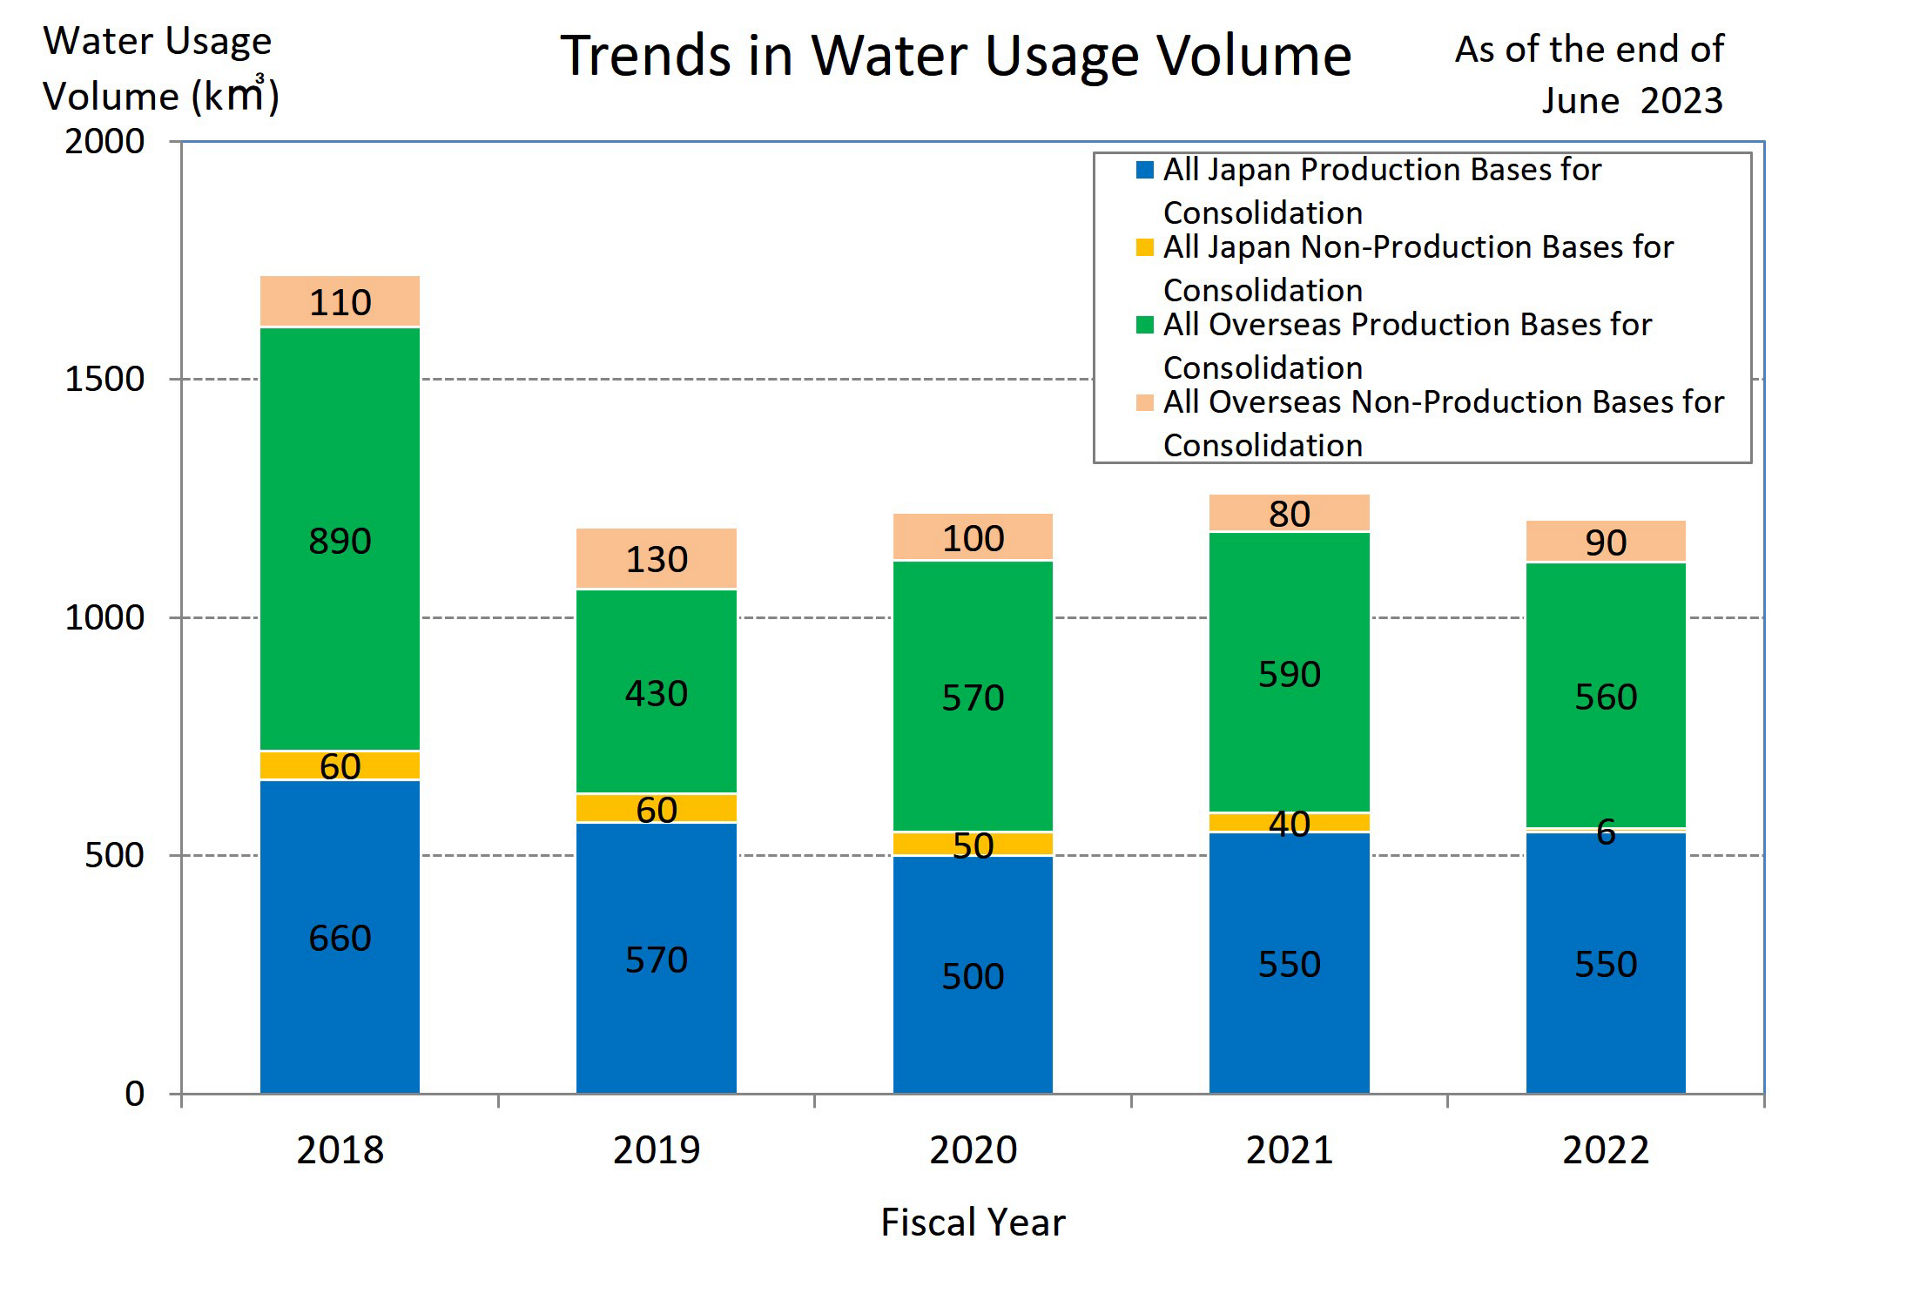 Trends in Water Usage Volume